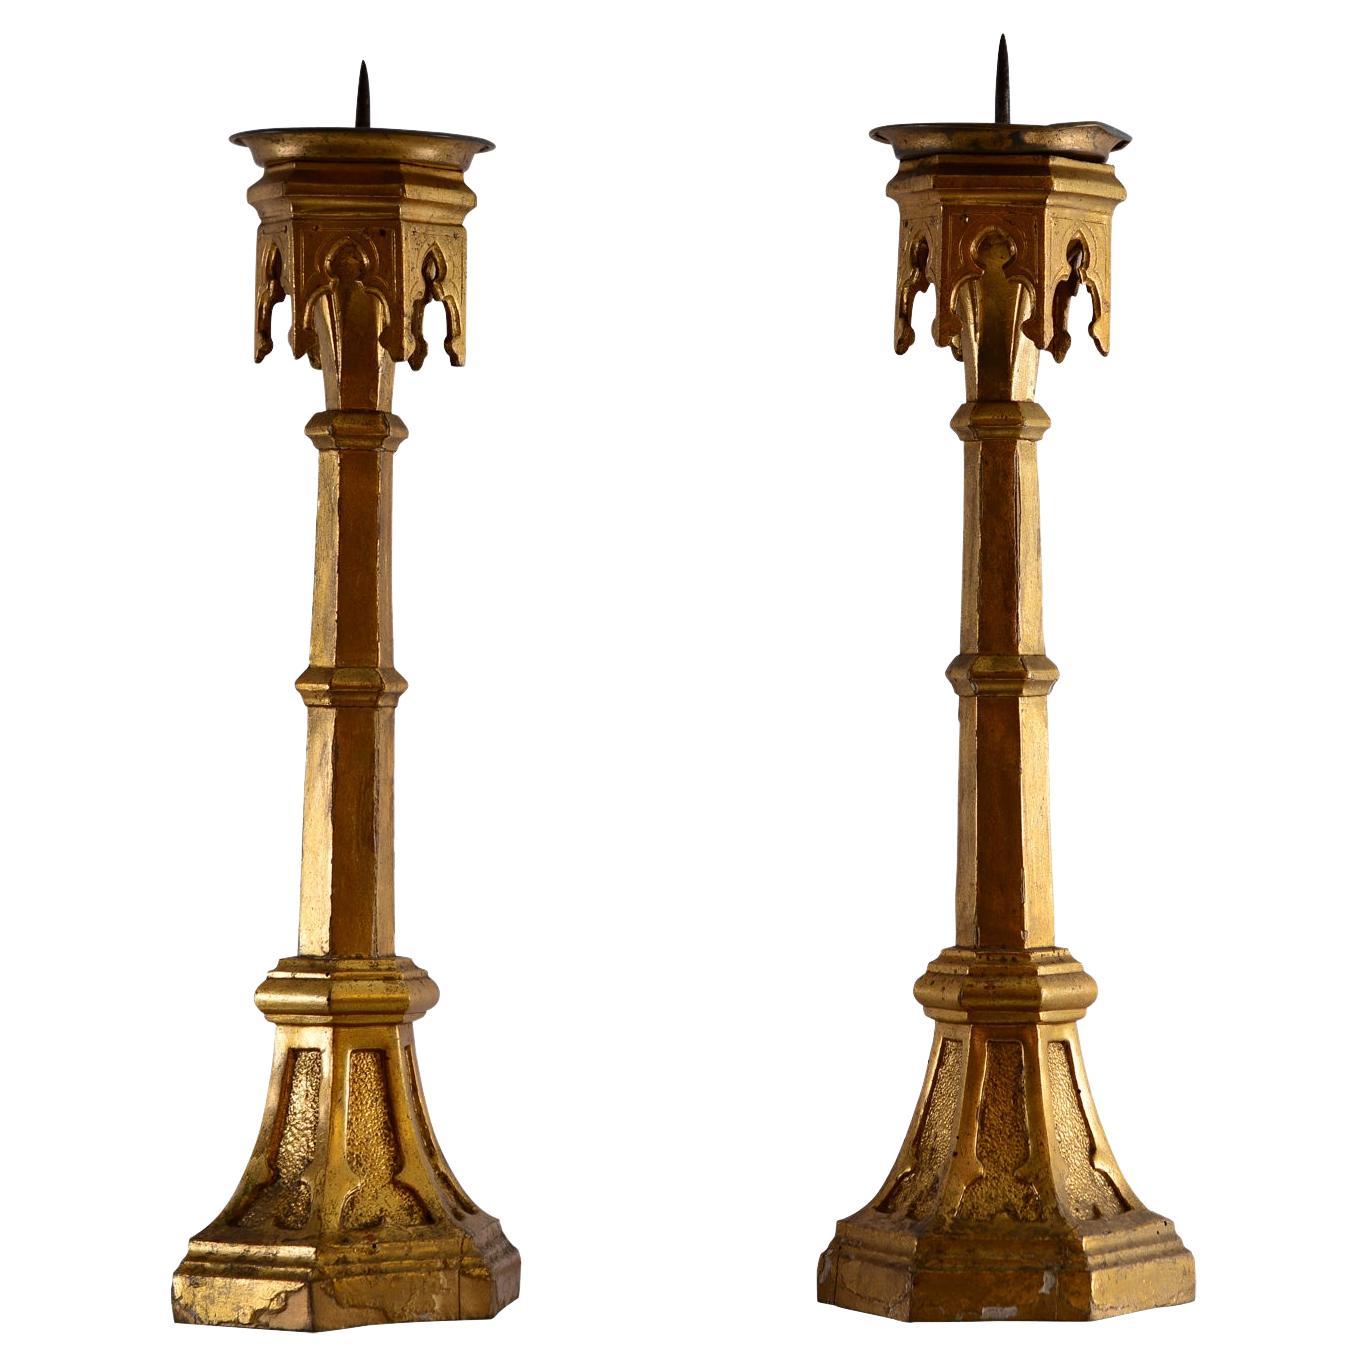 Original Gothic Style 1860 Candlesticks 19th Century Emperor of House Habsburg For Sale